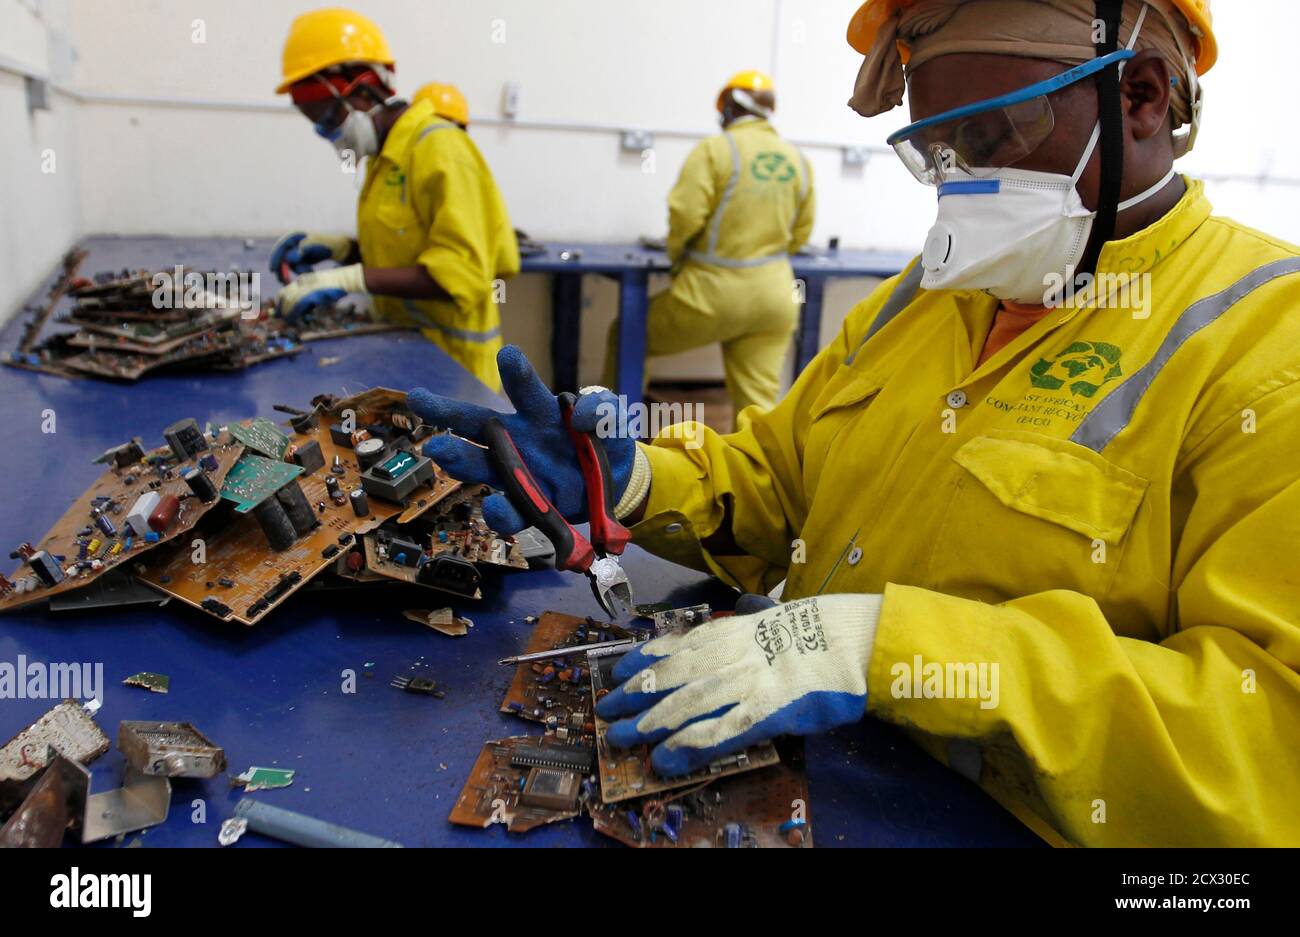 Employee sort out parts of discarded computers and other electronics for recycling at the East African Compliant Recycling (EACR) facility in Athi River near Kenya's capital Nairobi, March 7, 2014. The E-waste Solutions Alliance for Africa, a collaboration between Dell, HP, Nokia, Phillips and the recycler Reclaimed Appliances (UK) Ltd, has been working with key stakeholders and the Government of Kenya to develop the principles and processes needed for responsible collection and recycling of e-waste according to the EACR. REUTERS/Thomas Mukoya (KENYA - Tags: BUSINESS SCIENCE TECHNOLOGY EMPLOYM Stock Photo